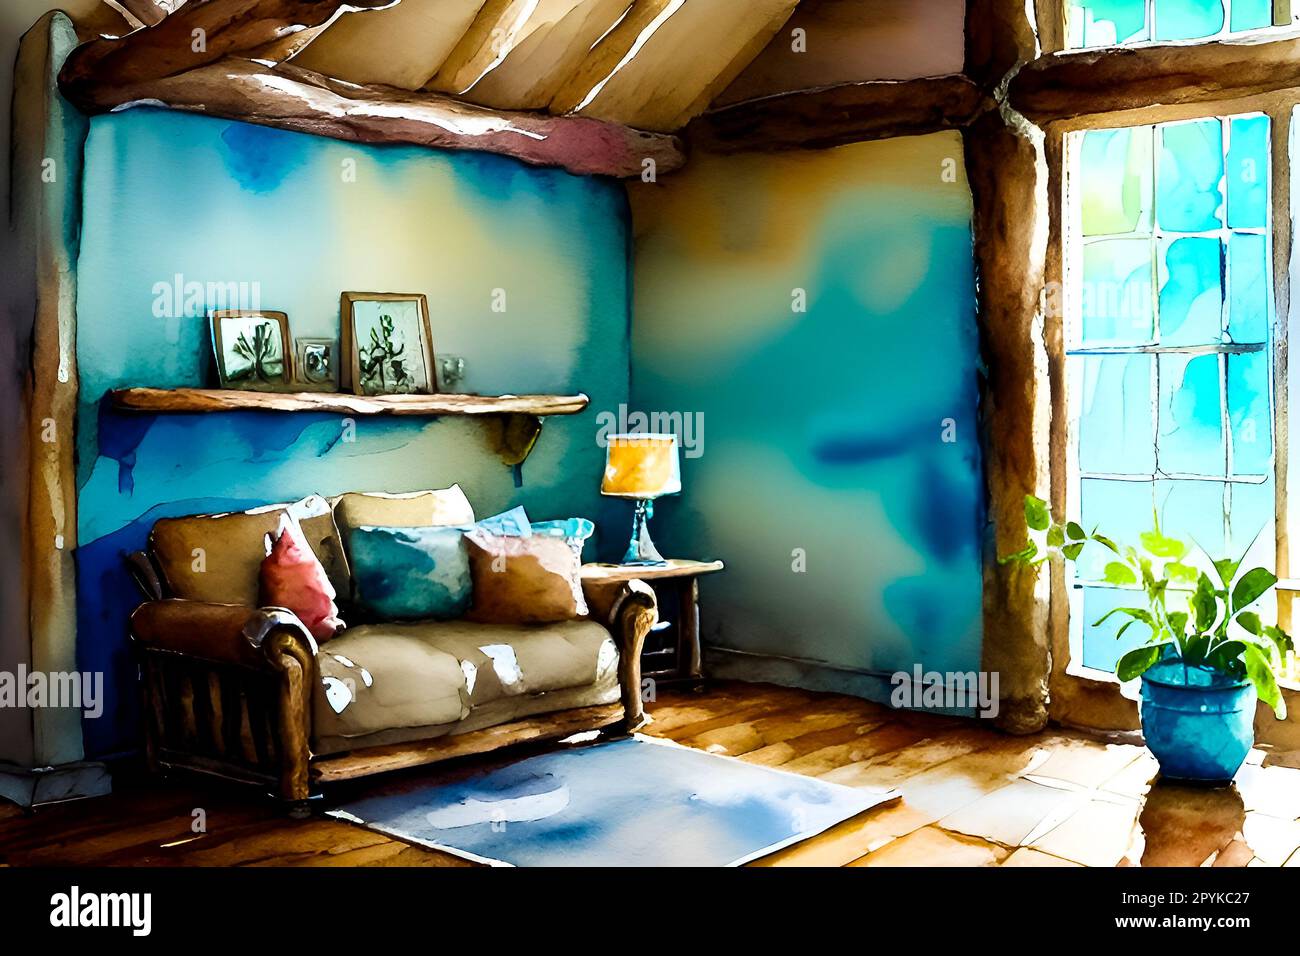 Interior of a small wooden house with a blue sofa and a coffee table Stock Photo